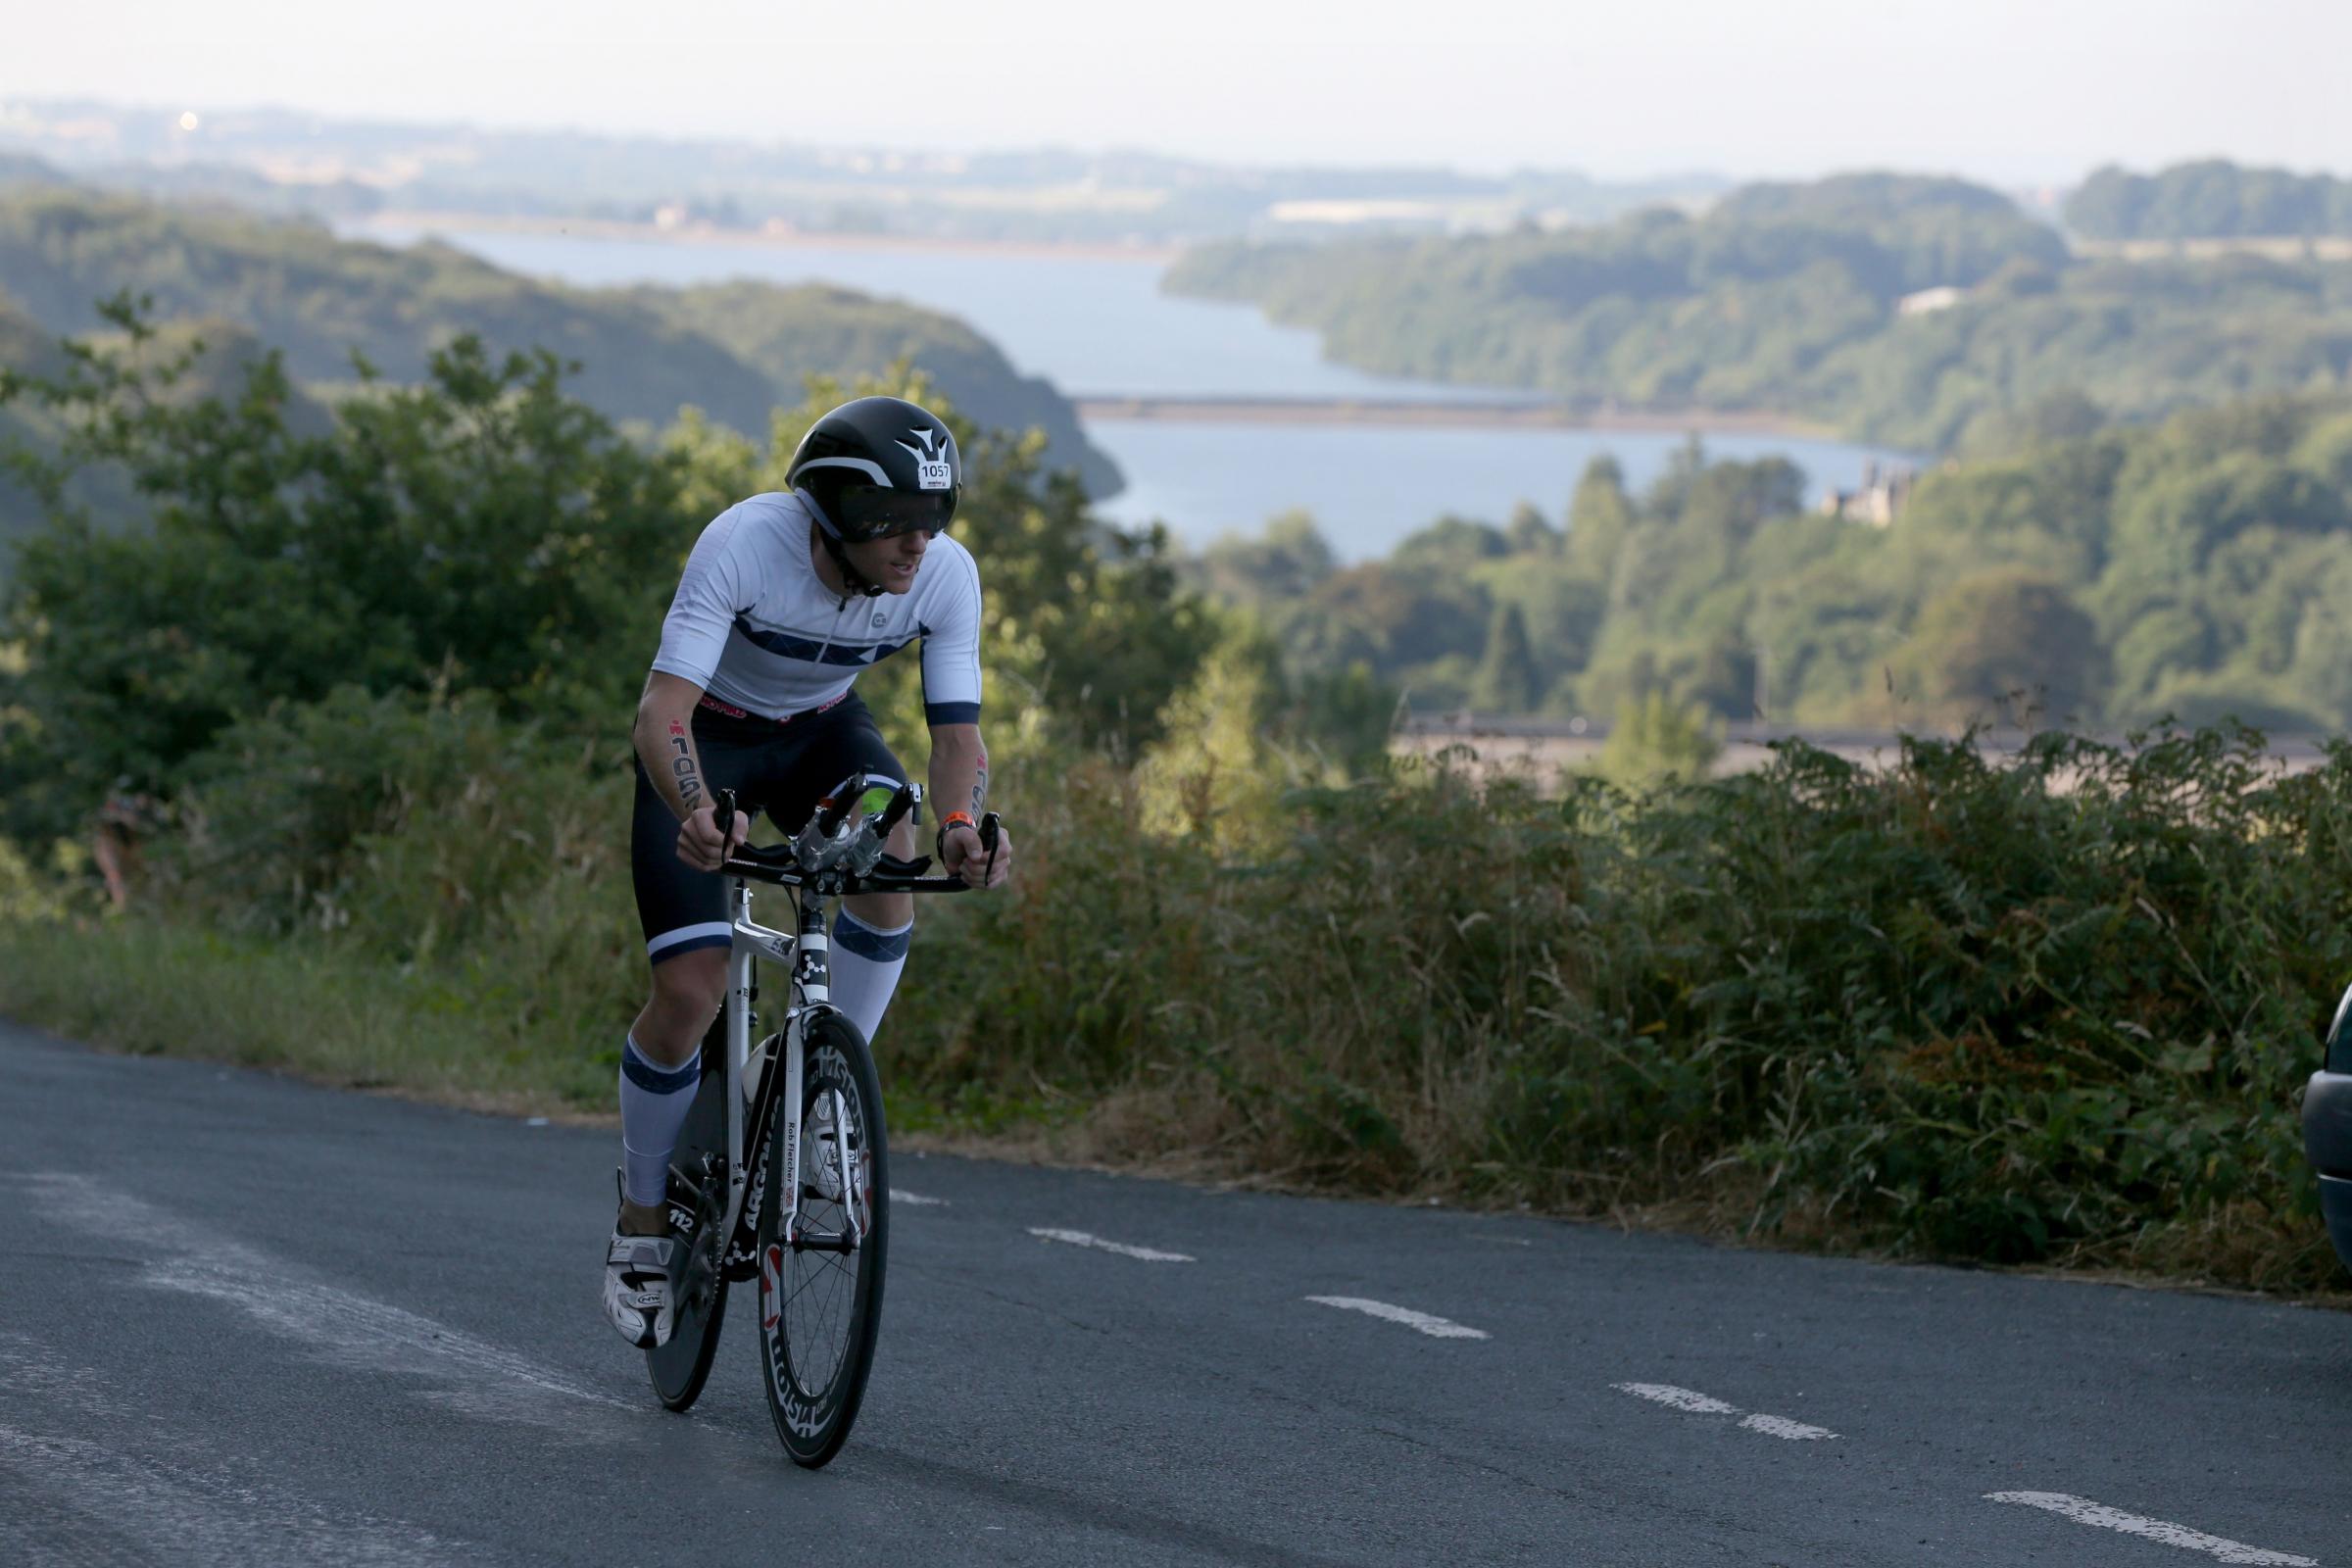 Ironman UK organisers announce new route for 2019